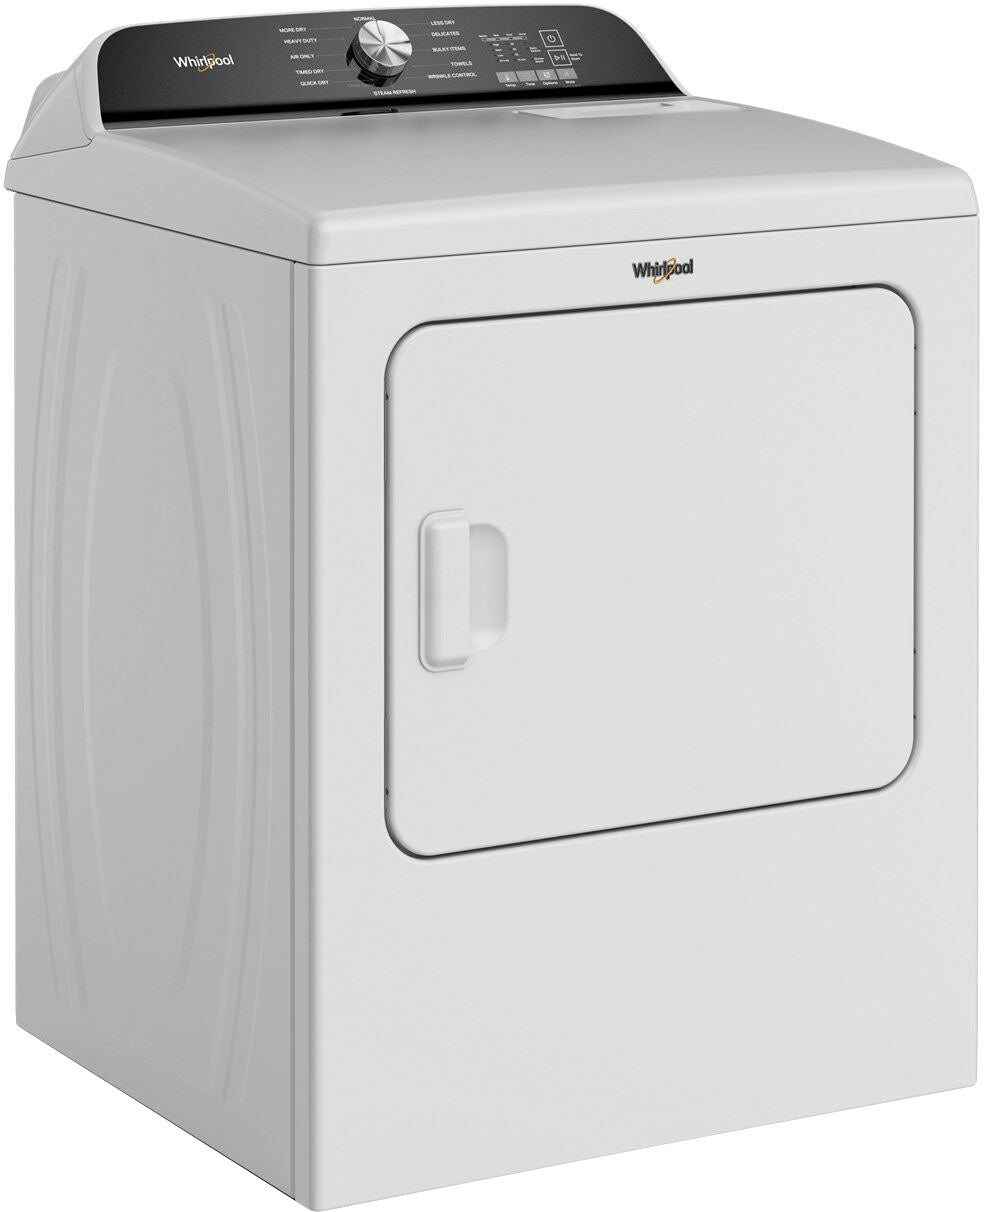 Whirlpool - 7.0 Cu. Ft. Electric Dryer with Moisture Sensor - White_4